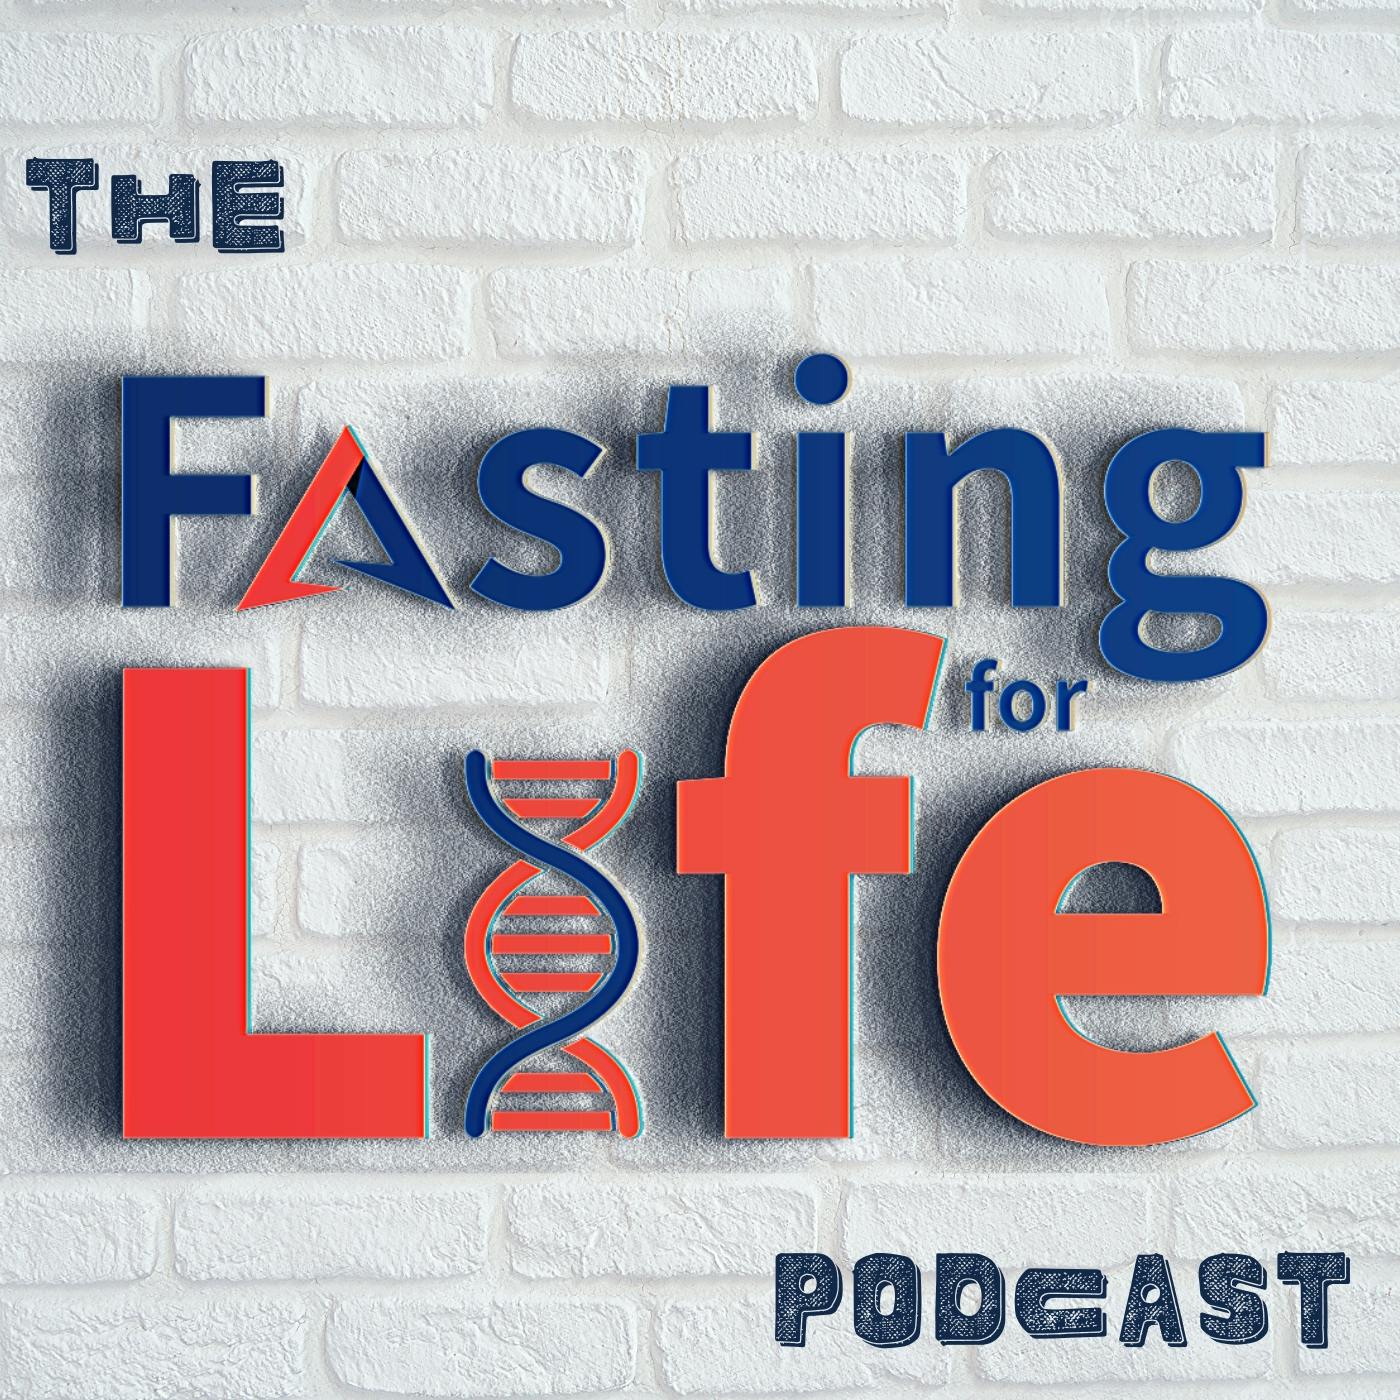 Ep. 190 - Improve your blood sugar & labs with intermittent fasting & time-restricted eating vs. caloric restriction | Your weight might plateau while improving blood sugar, blood pressure & HbA1c | W